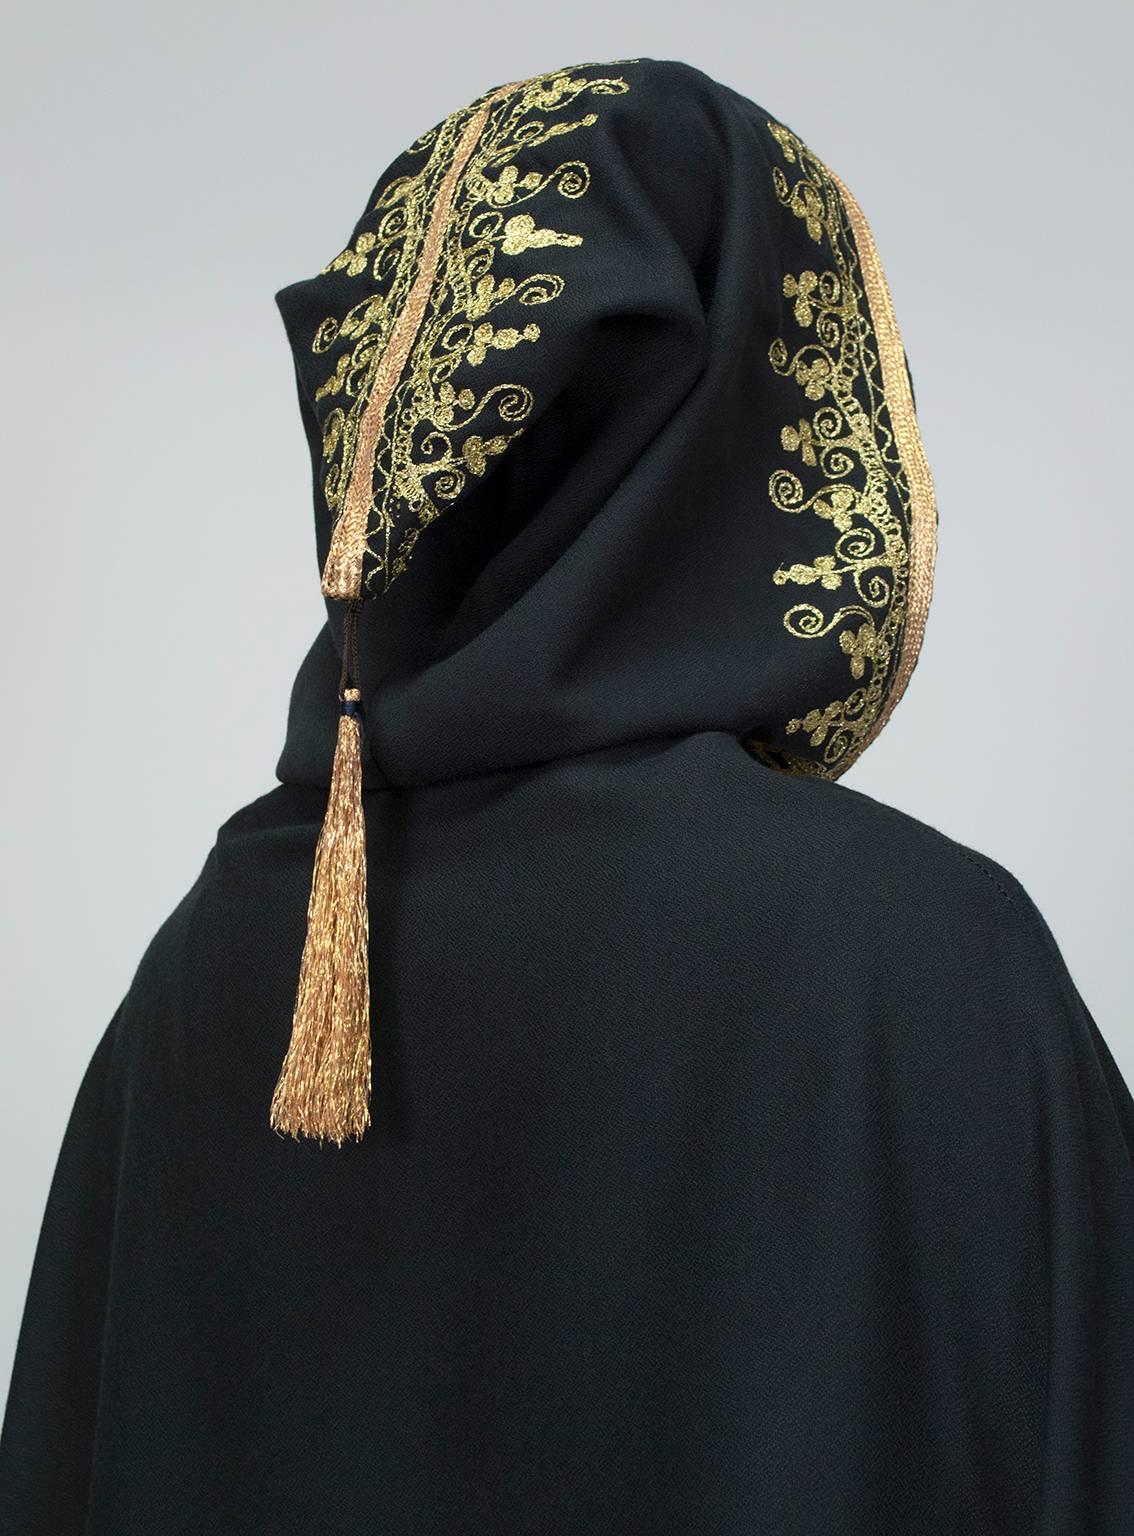 Women's Moroccan Gold Embroidered Cloak with Tasseled Hood, 1960s